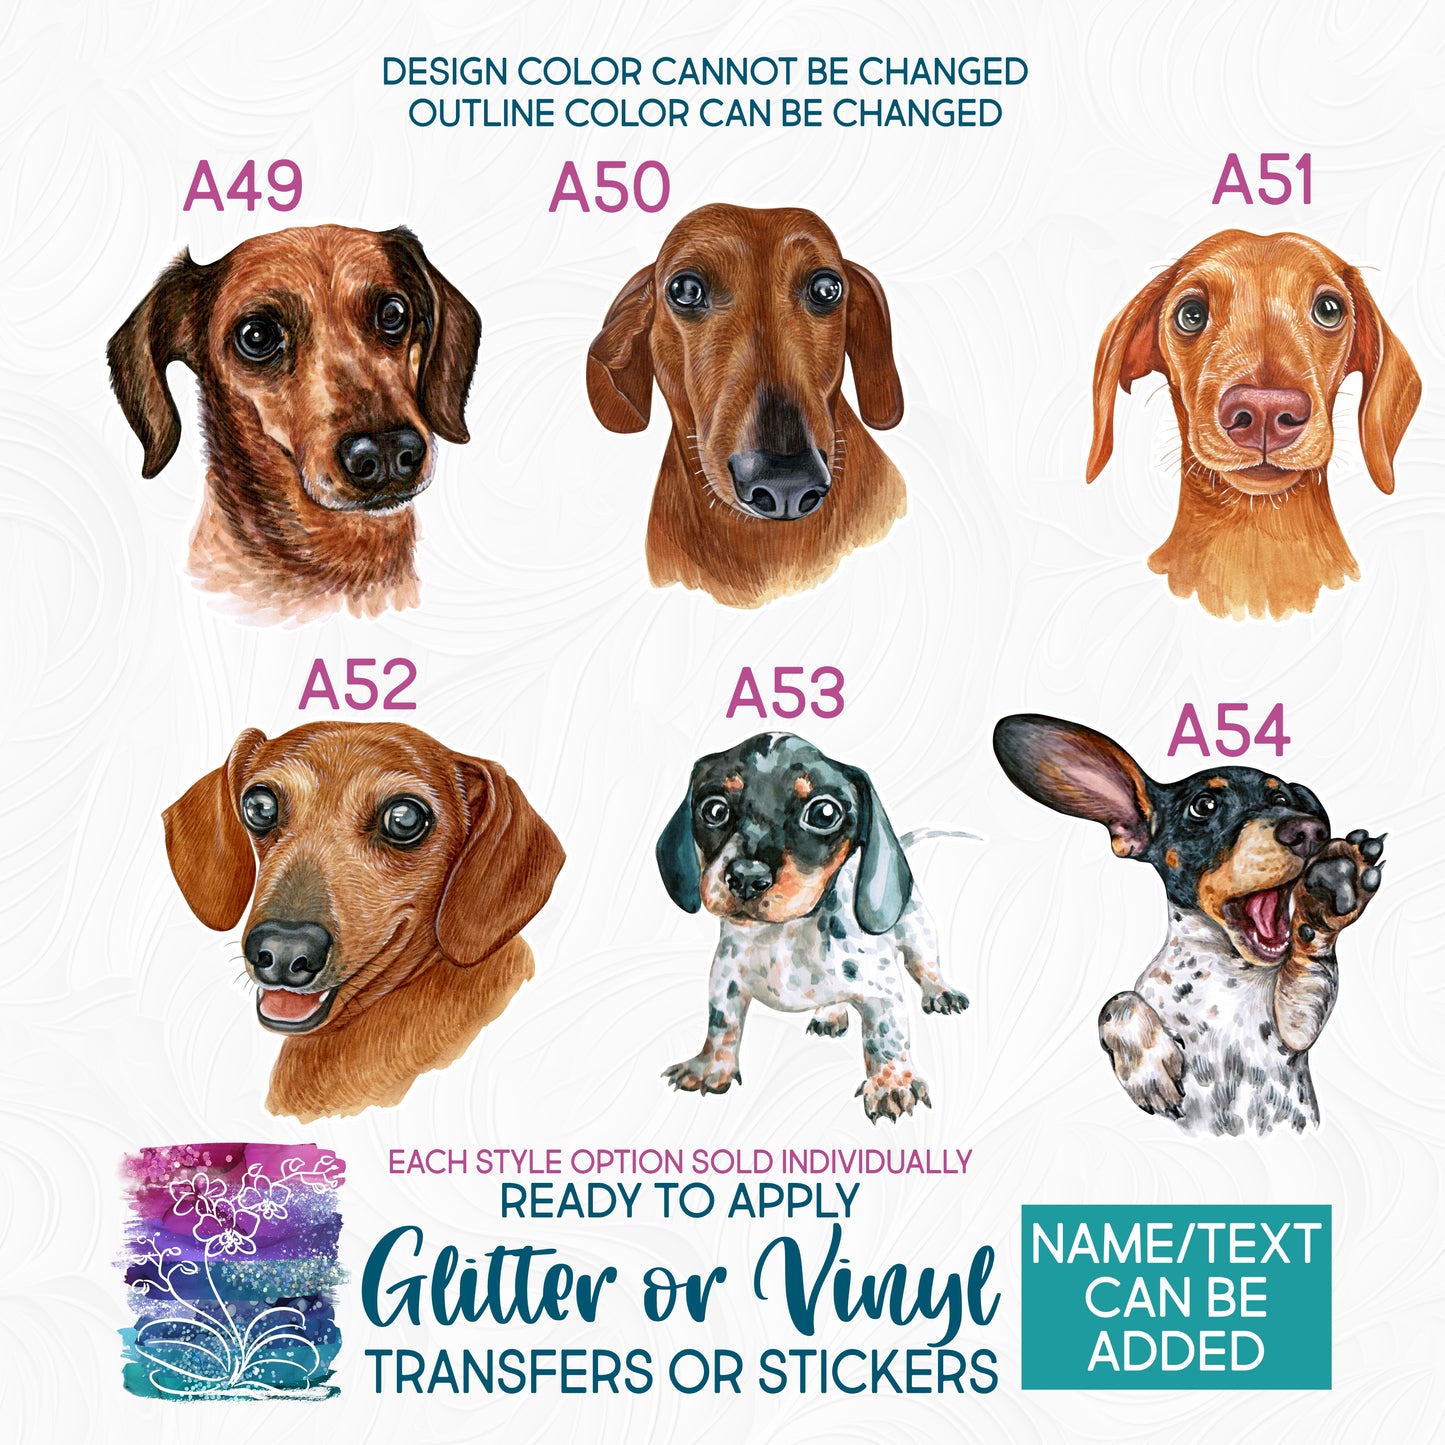 (s053-A) Watercolor Dogs Dachshund Doxie Glitter or Vinyl Iron-On Transfer or Sticker